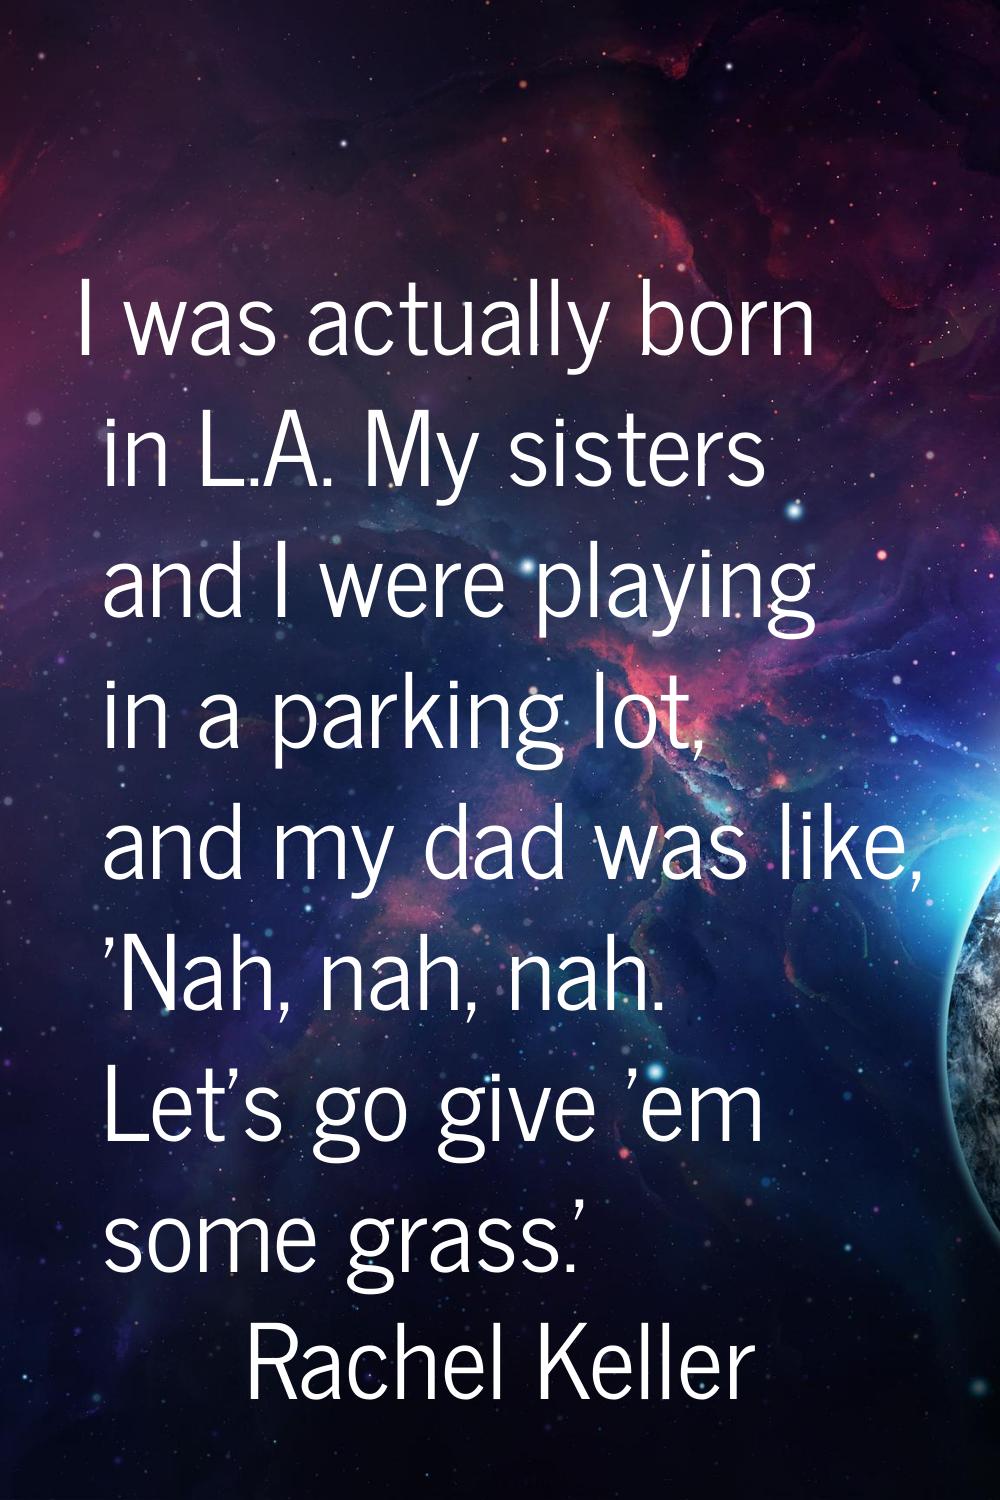 I was actually born in L.A. My sisters and I were playing in a parking lot, and my dad was like, 'N